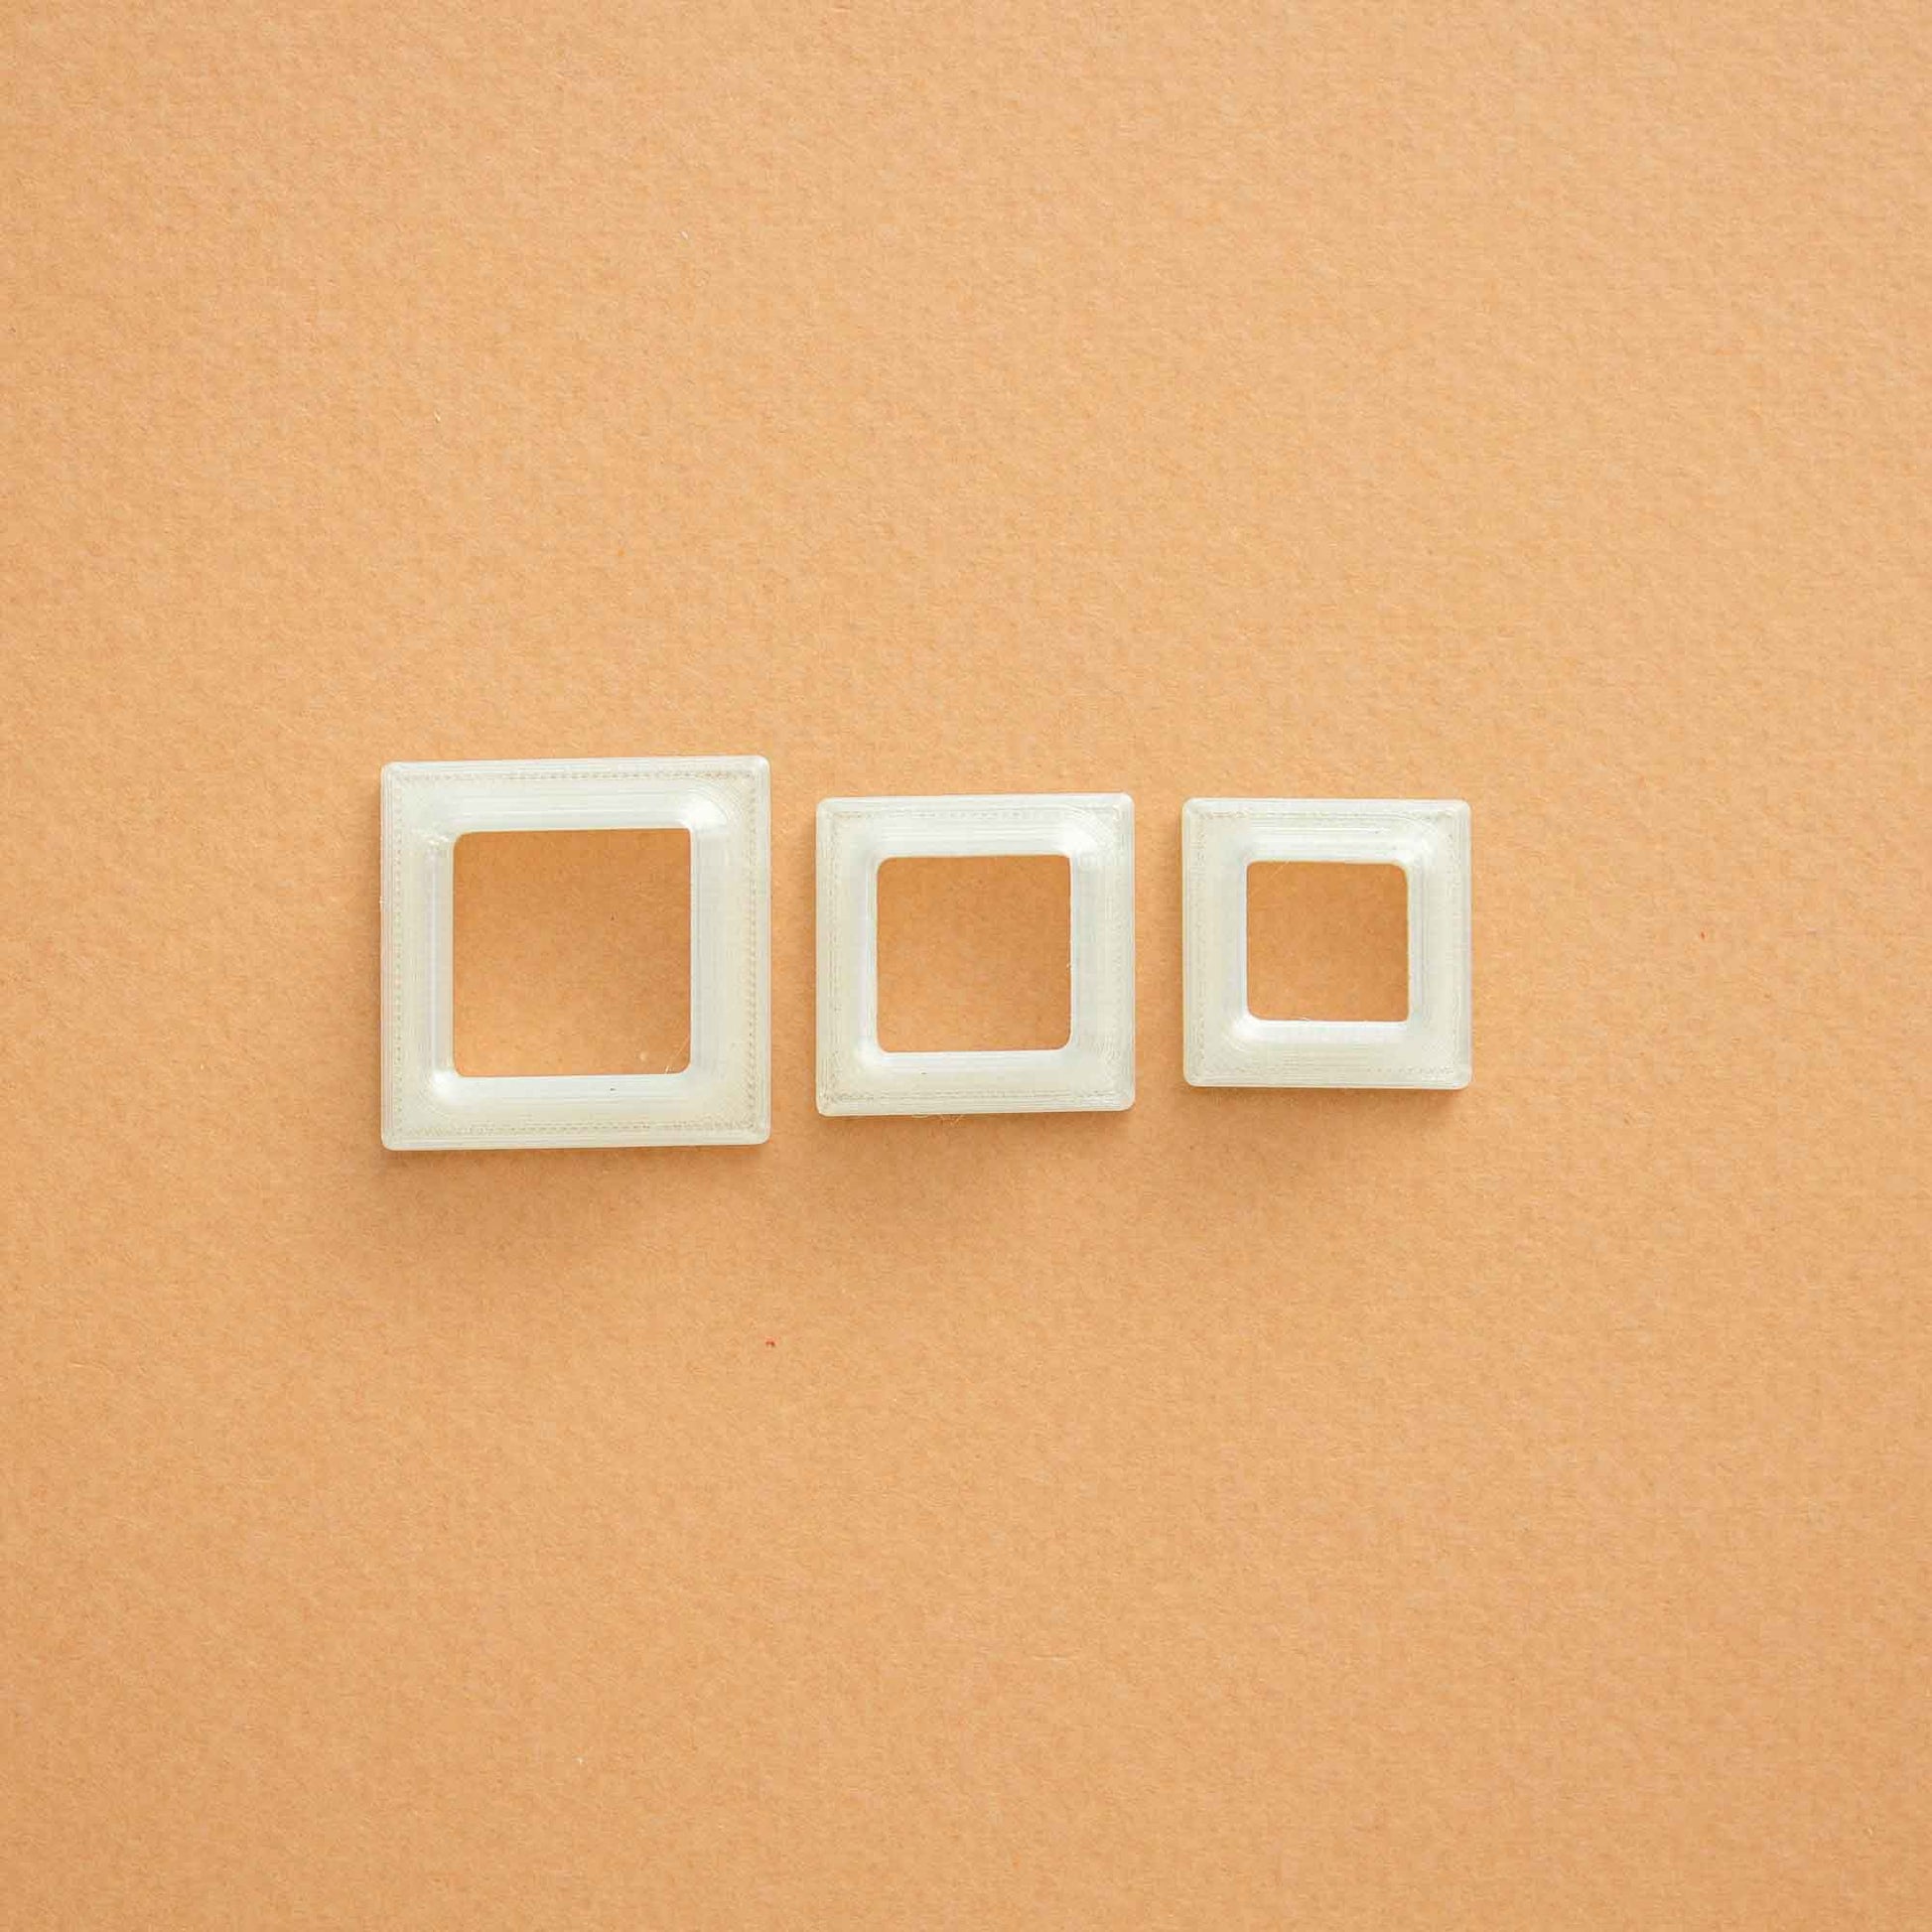 3 small square polymer clay cutters on a light brown background